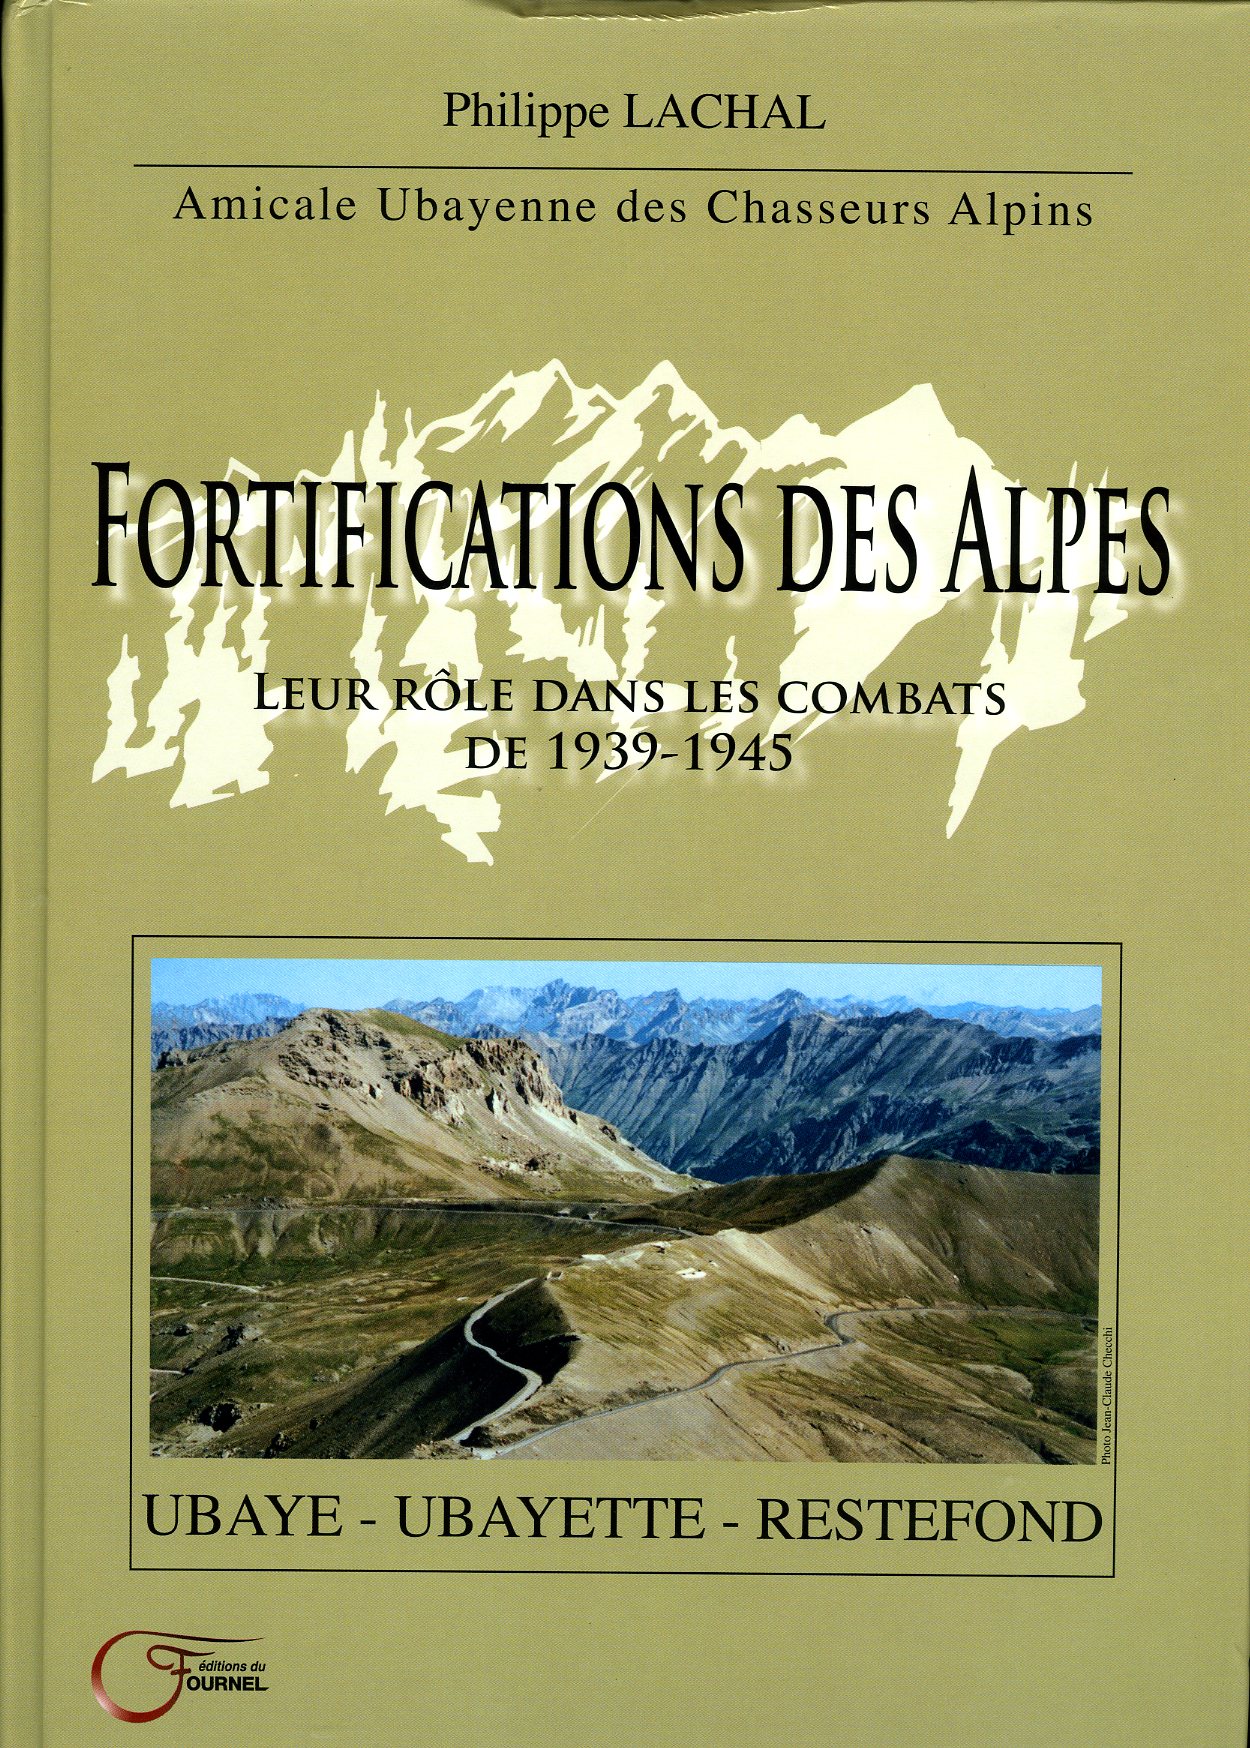 Fortifications des Alpes - Ubaye-Ubayette-Restefond - LACHAL, Philippe